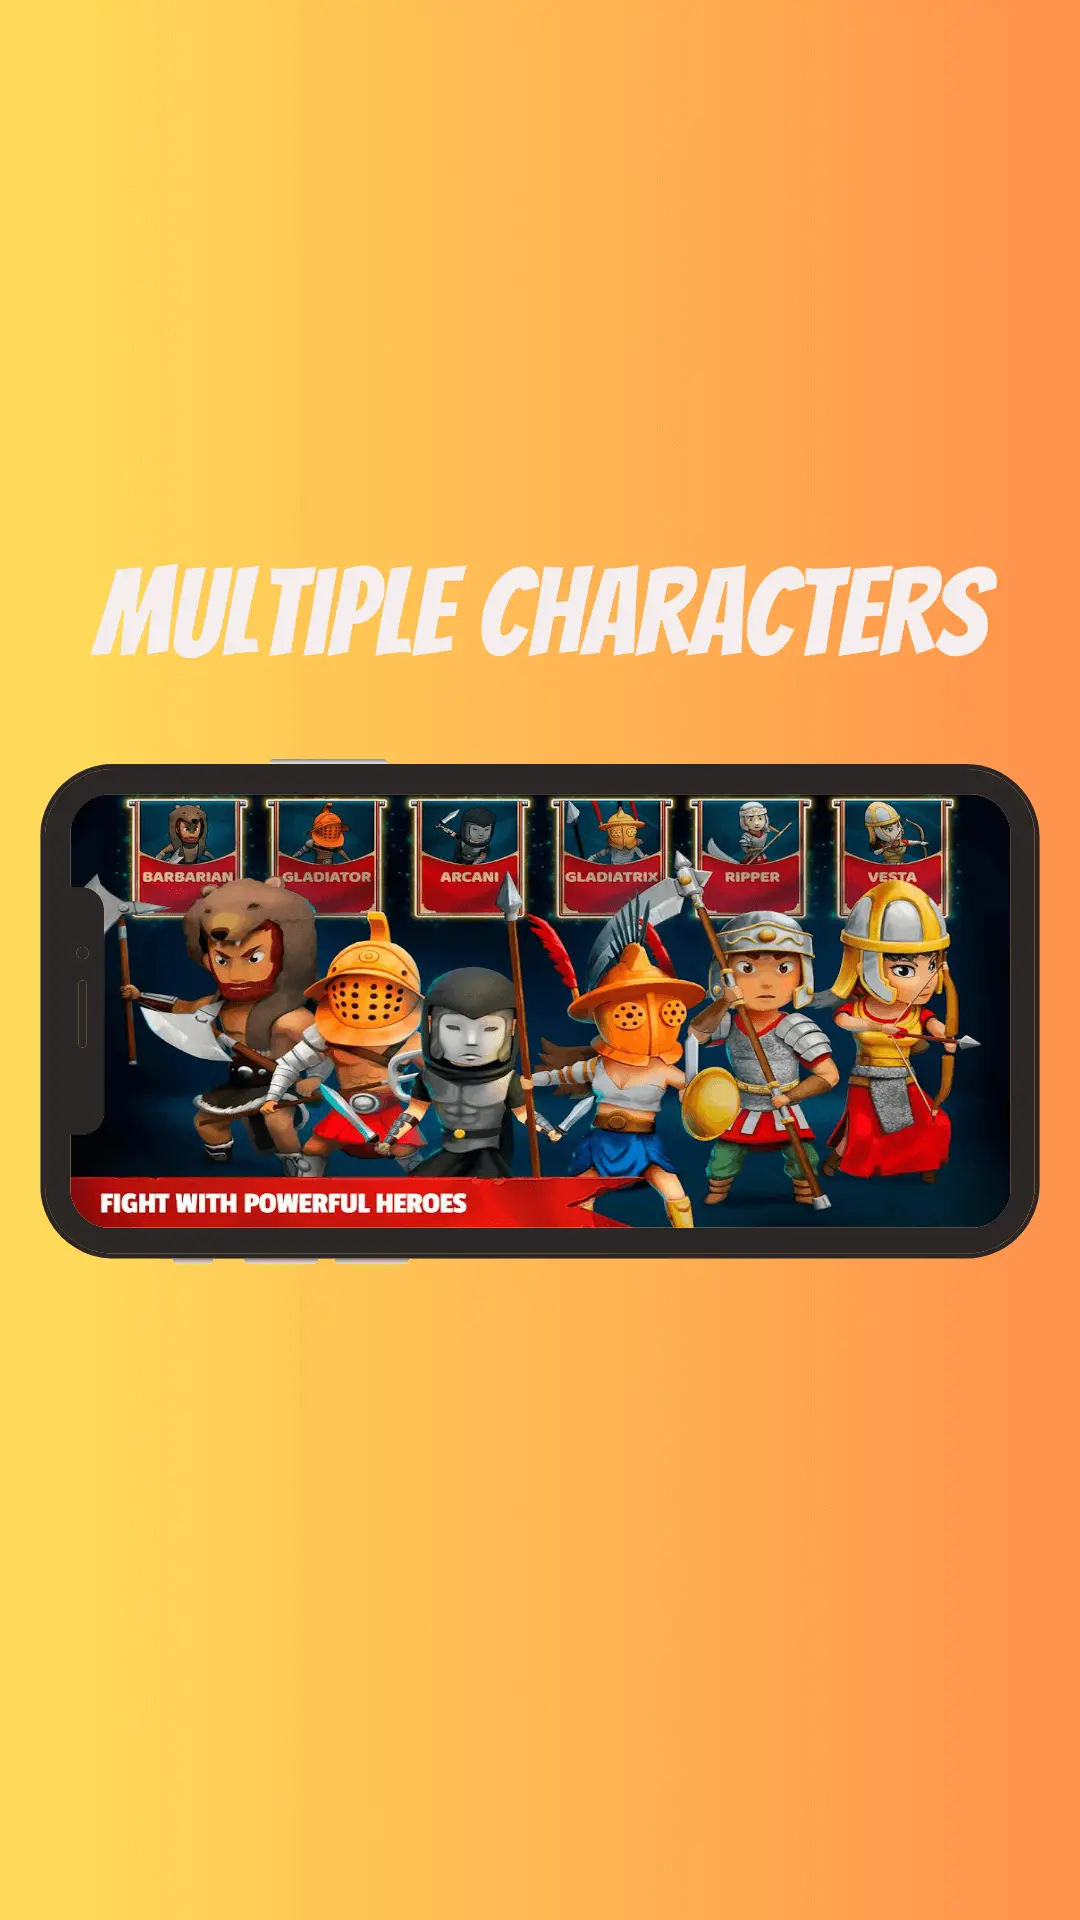 MULTIPLE CHARACTERS